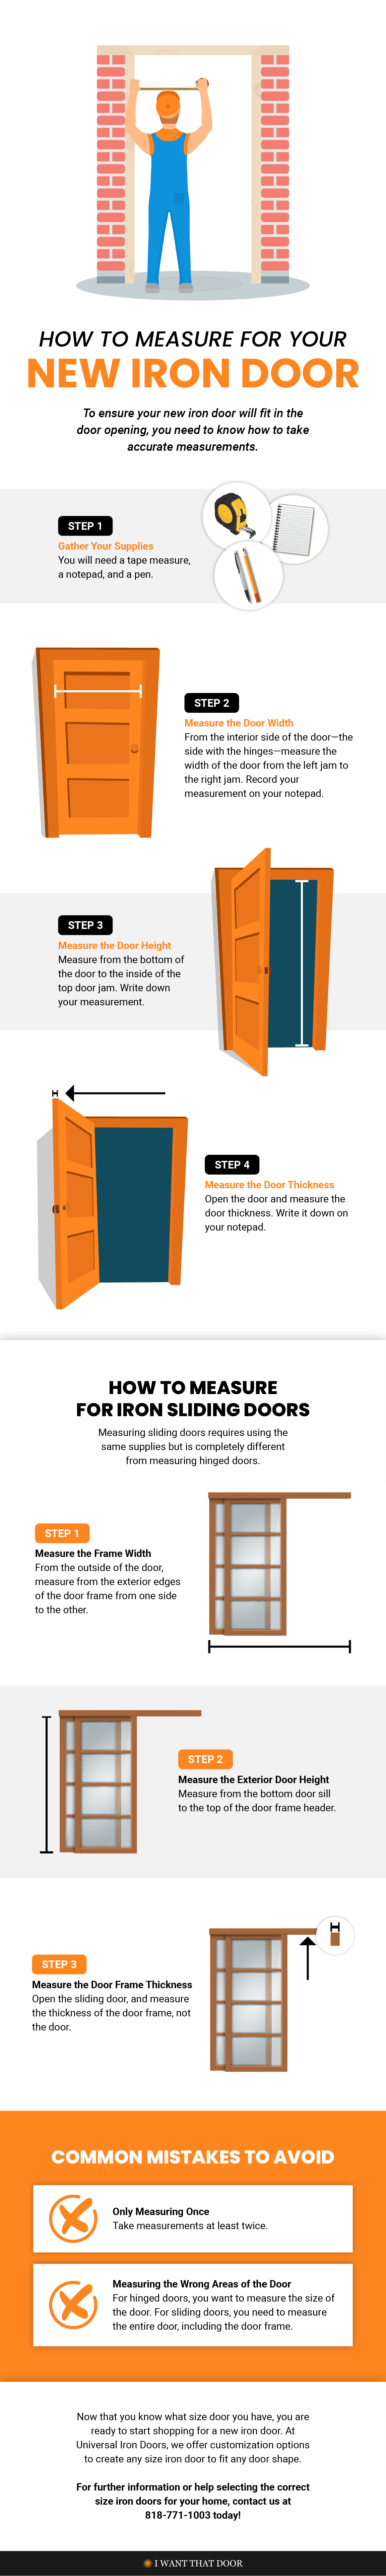 How to Measure for Your New Iron Door Infographic